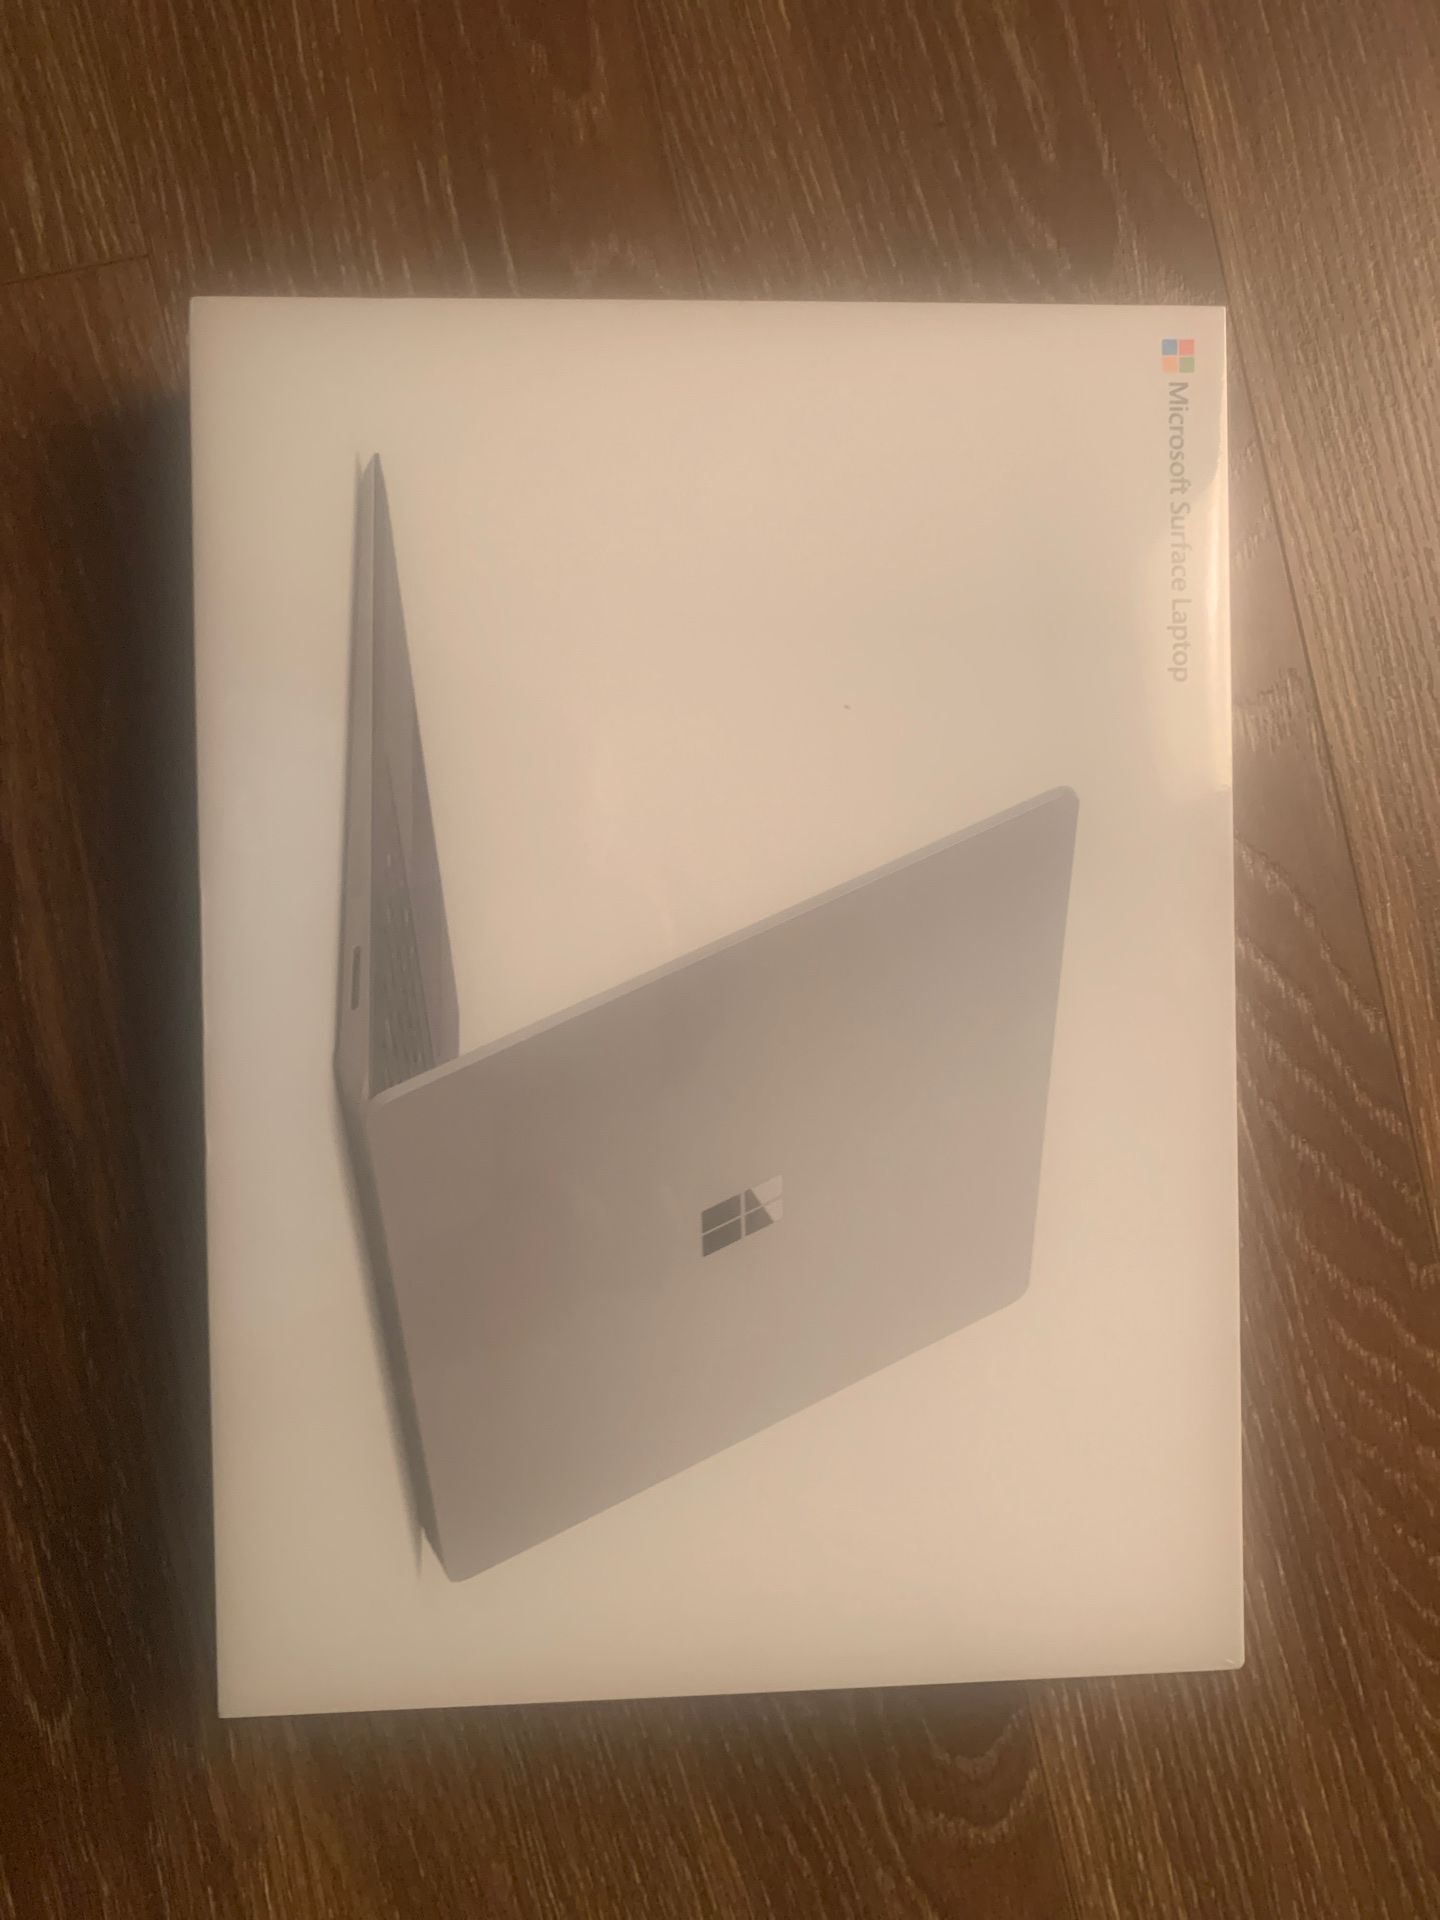 Brand New Sealed Microsoft Surface Laptop for sale